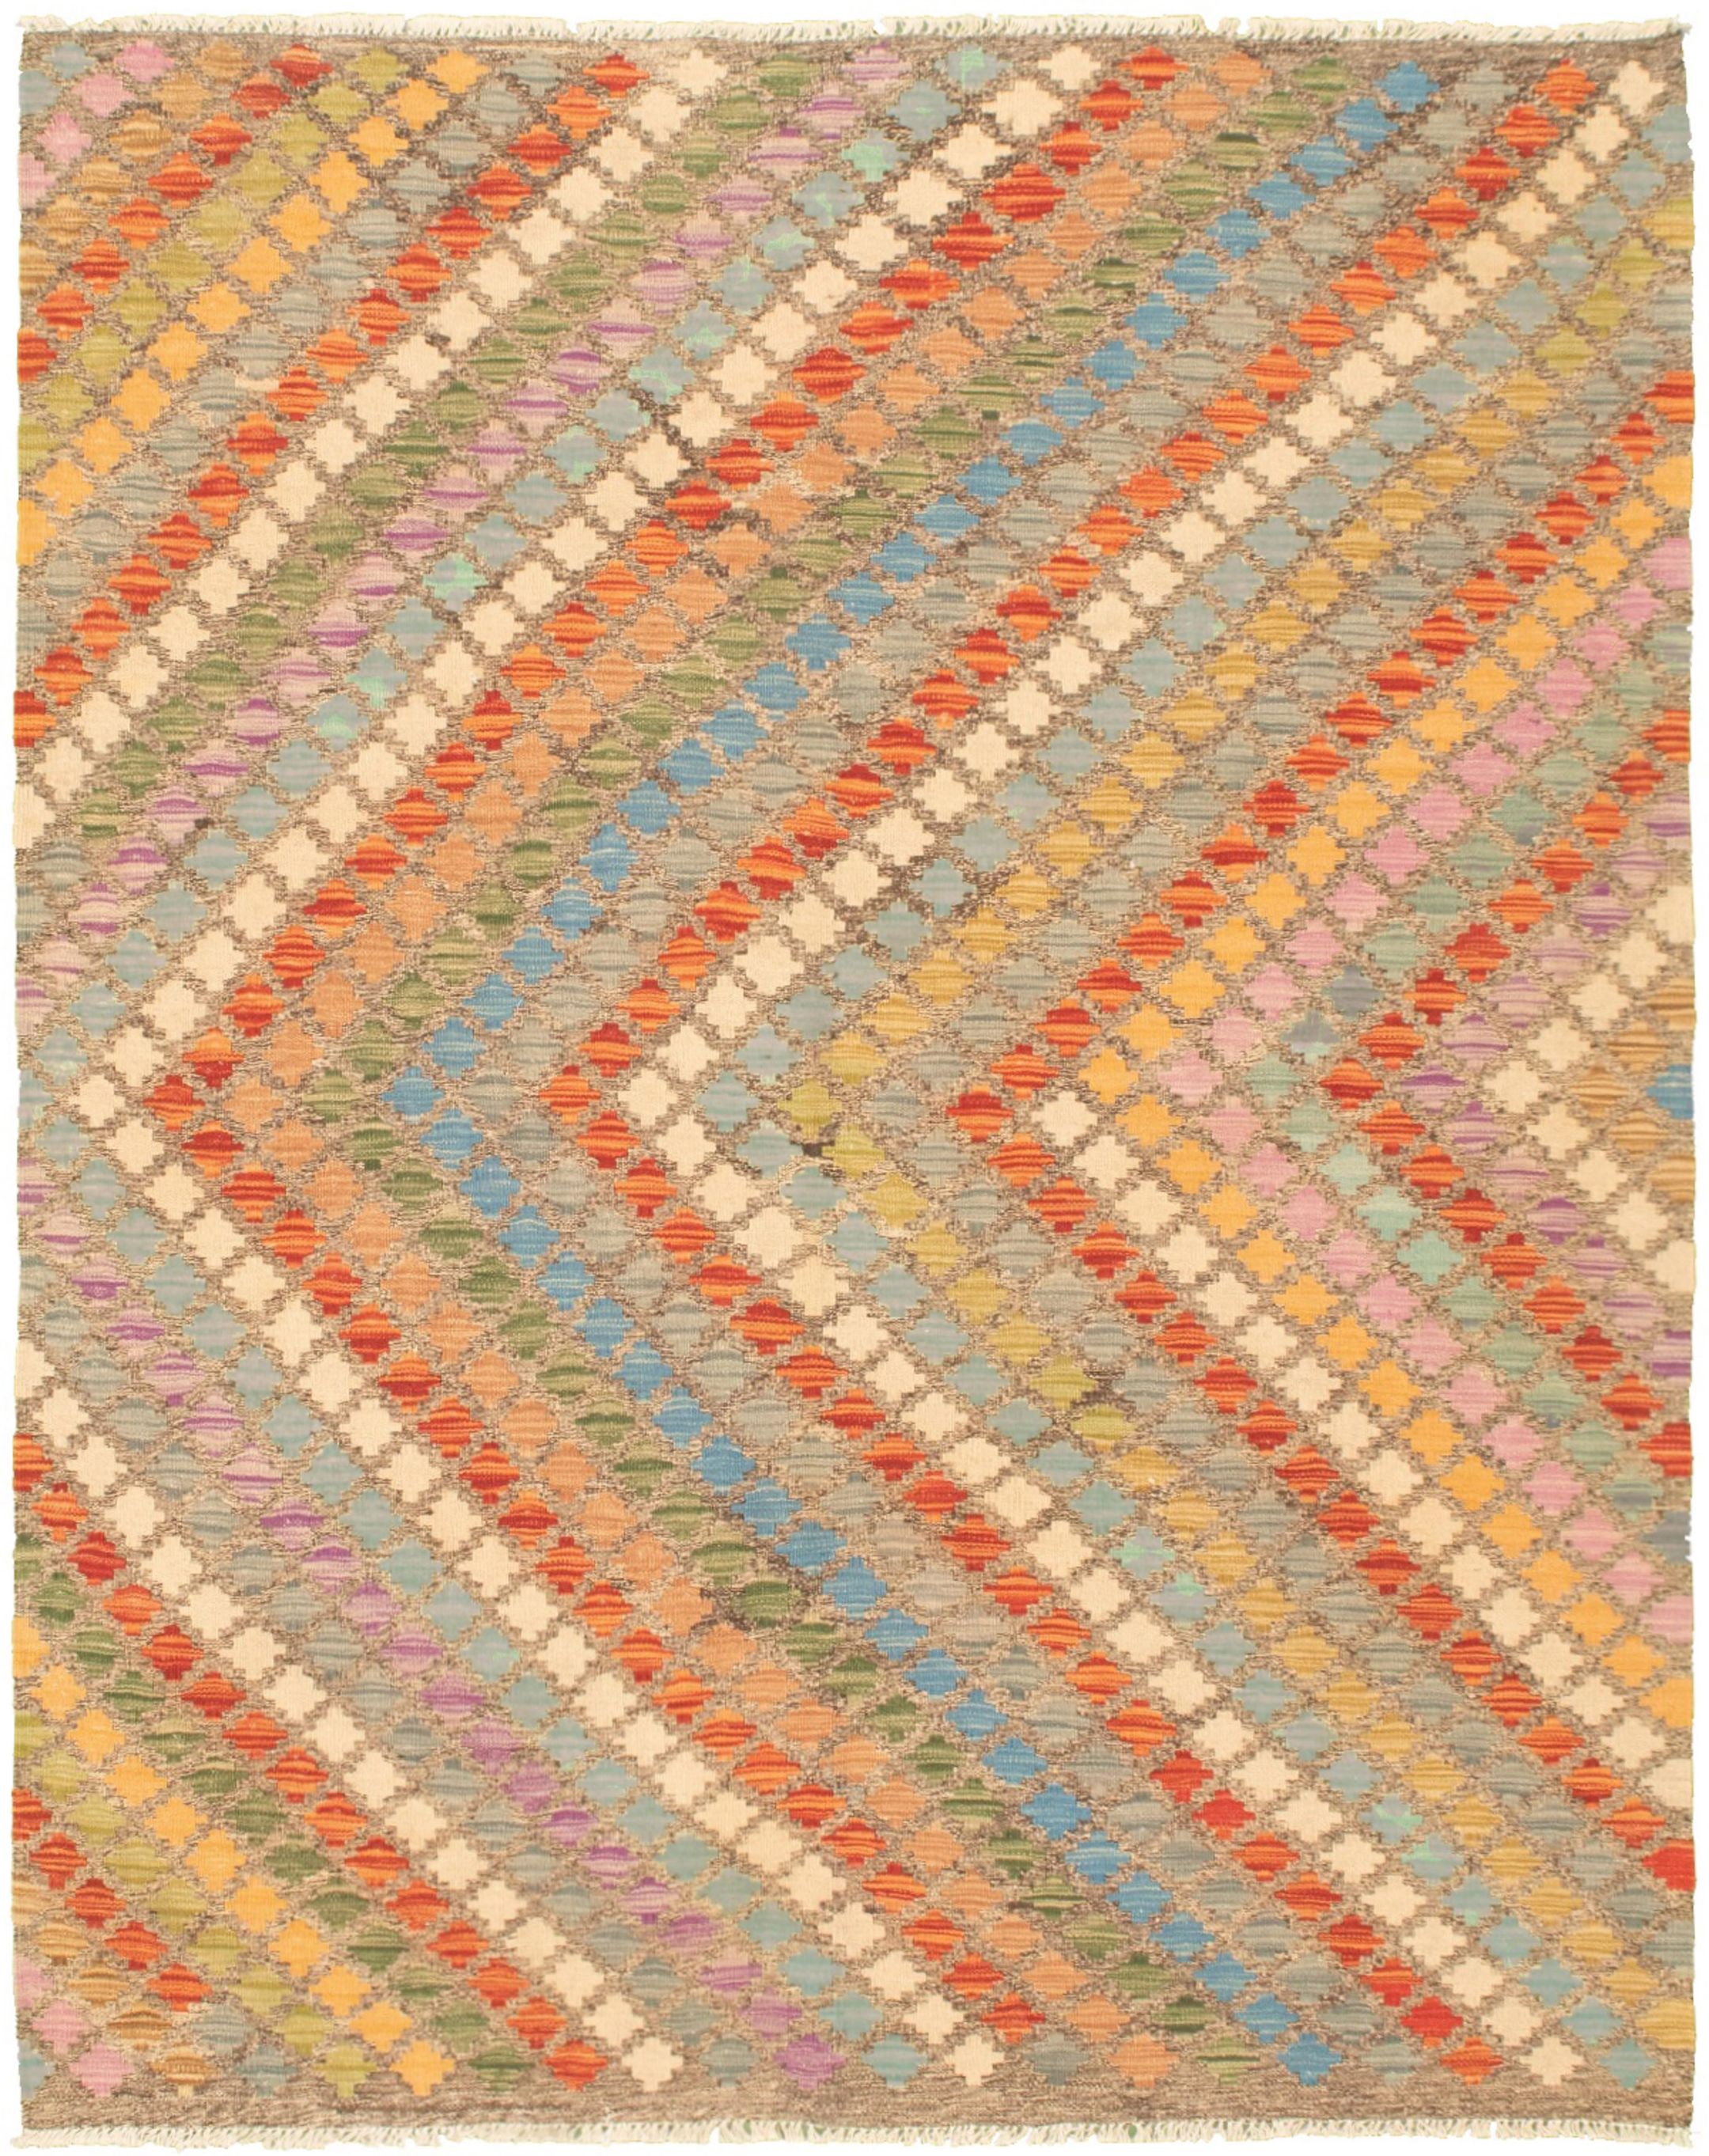 Hand woven Bold and Colorful  Grey  Kilim 5'3" x 6'8" Size: 5'3" x 6'8"  